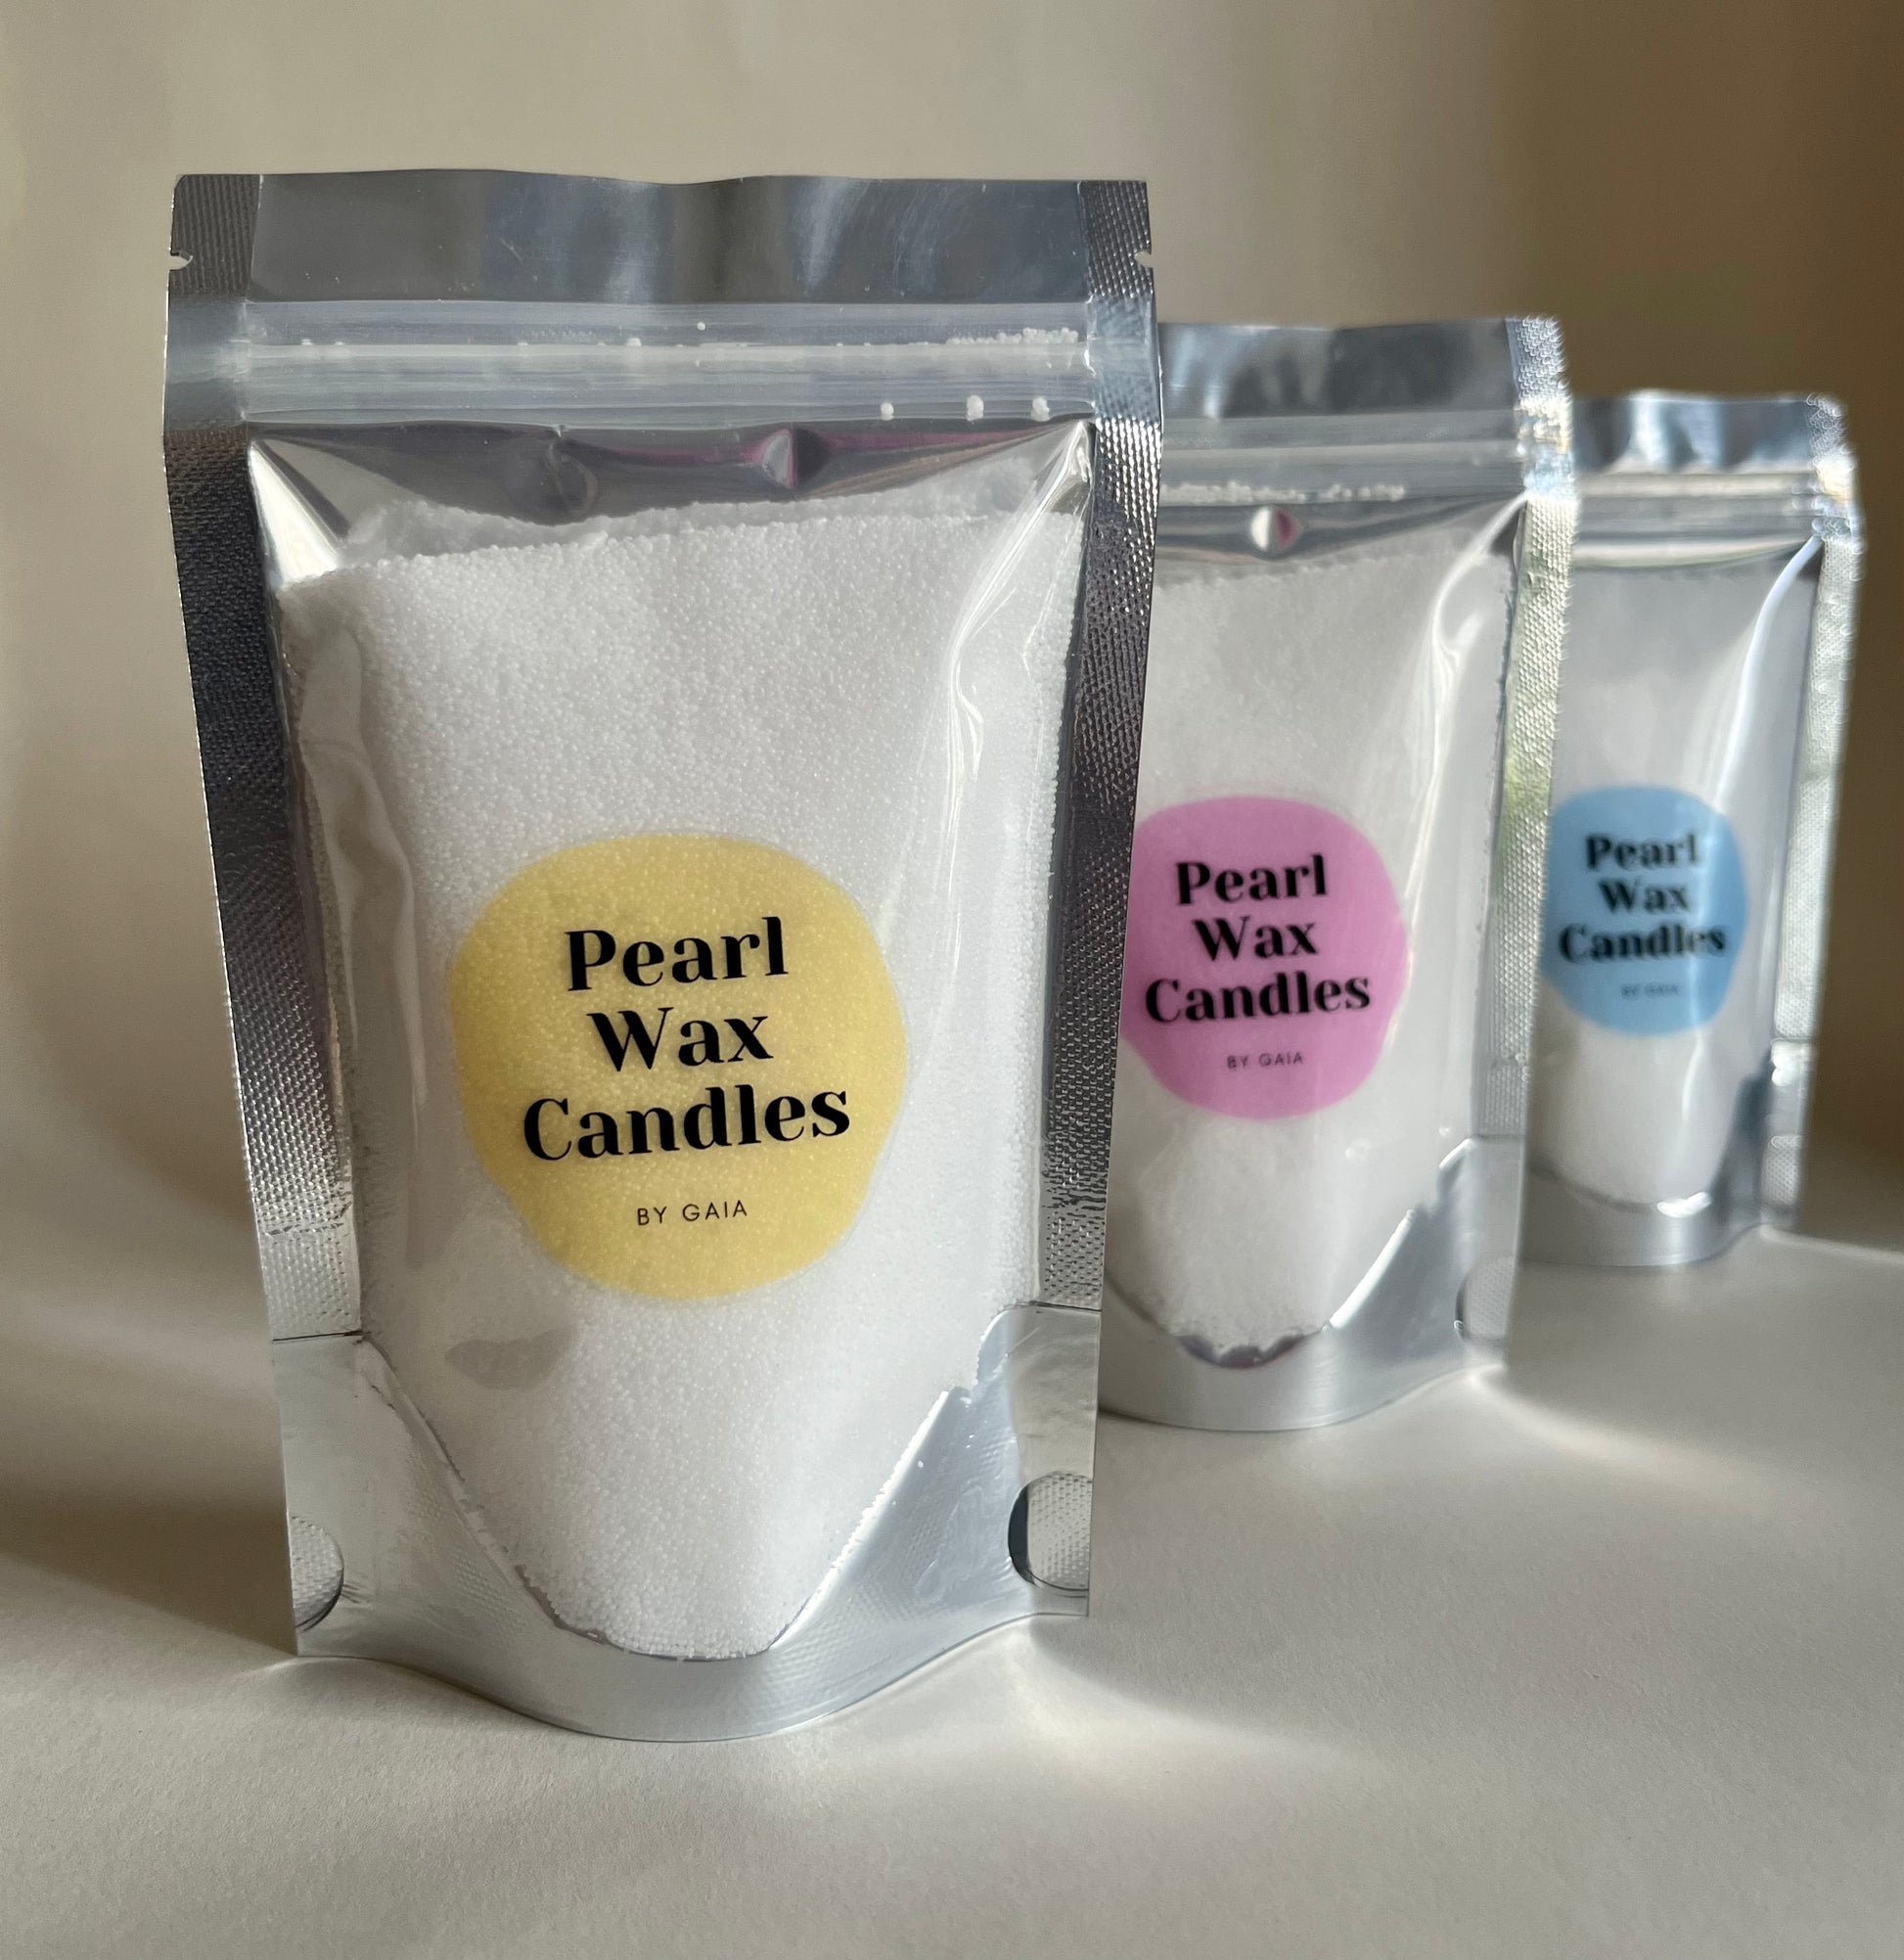 Pearled Wax 1 lb (454g) – Candle Pearls